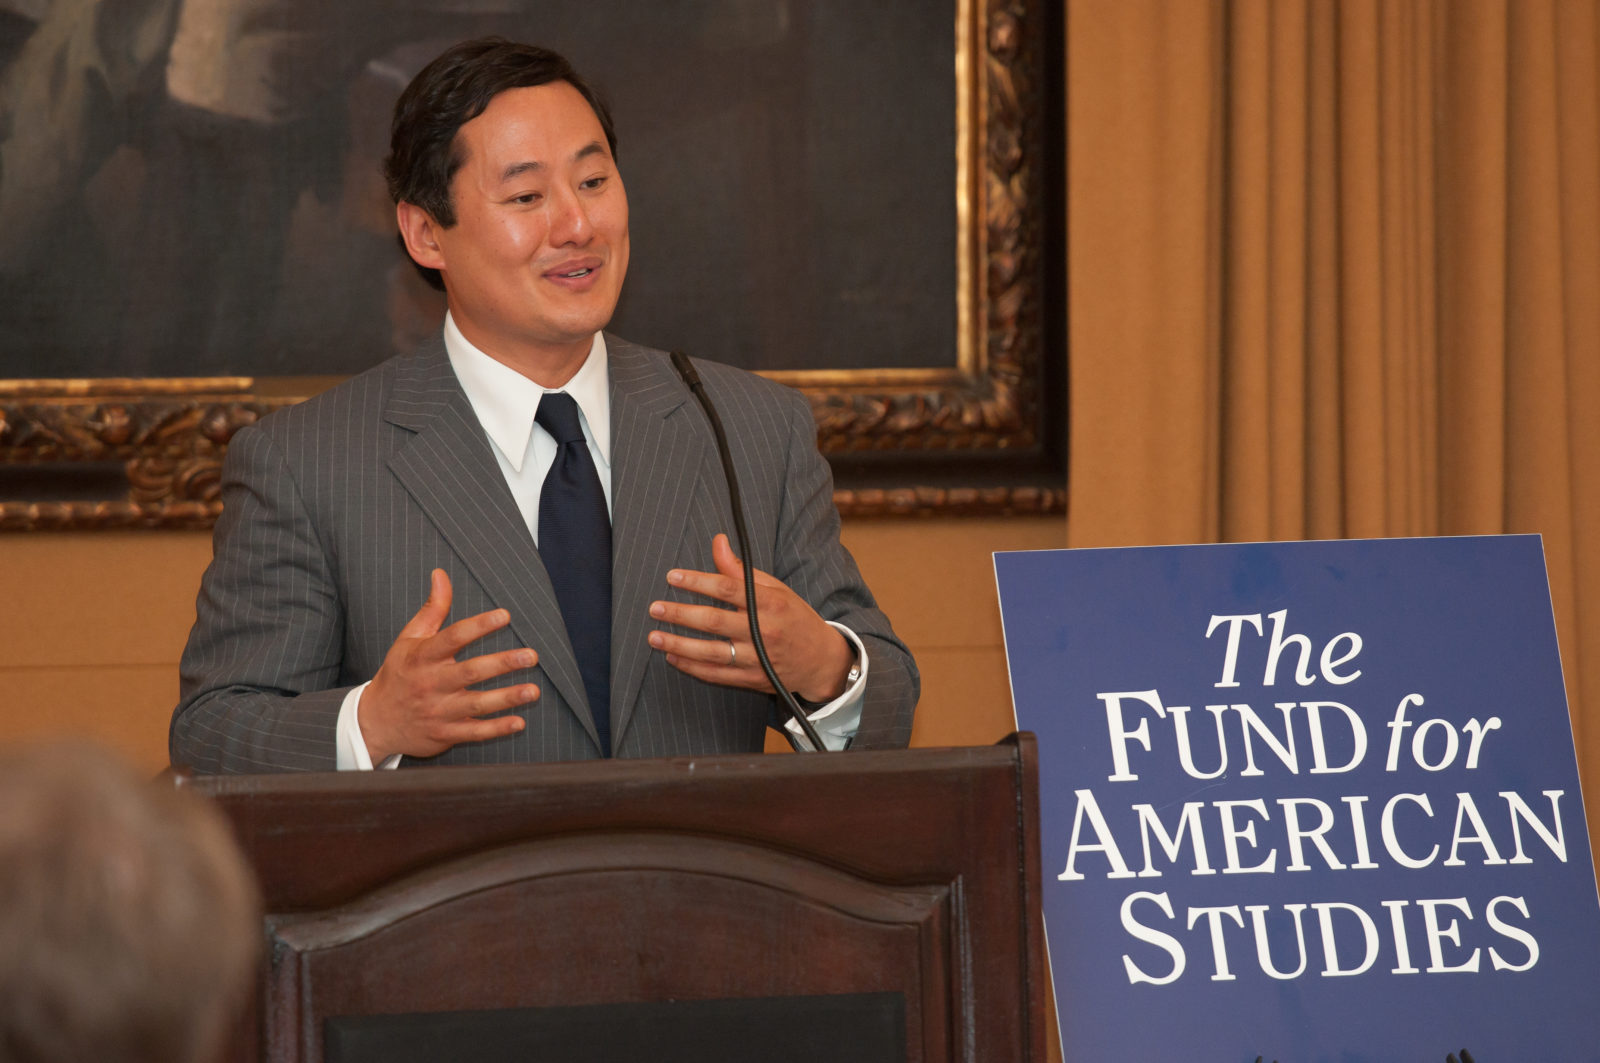 Former Deputy Assistant for the Attorney General’s Office of Legal Counsel at the U.S. Department of Justice, John Yoo, gave the keynote address.